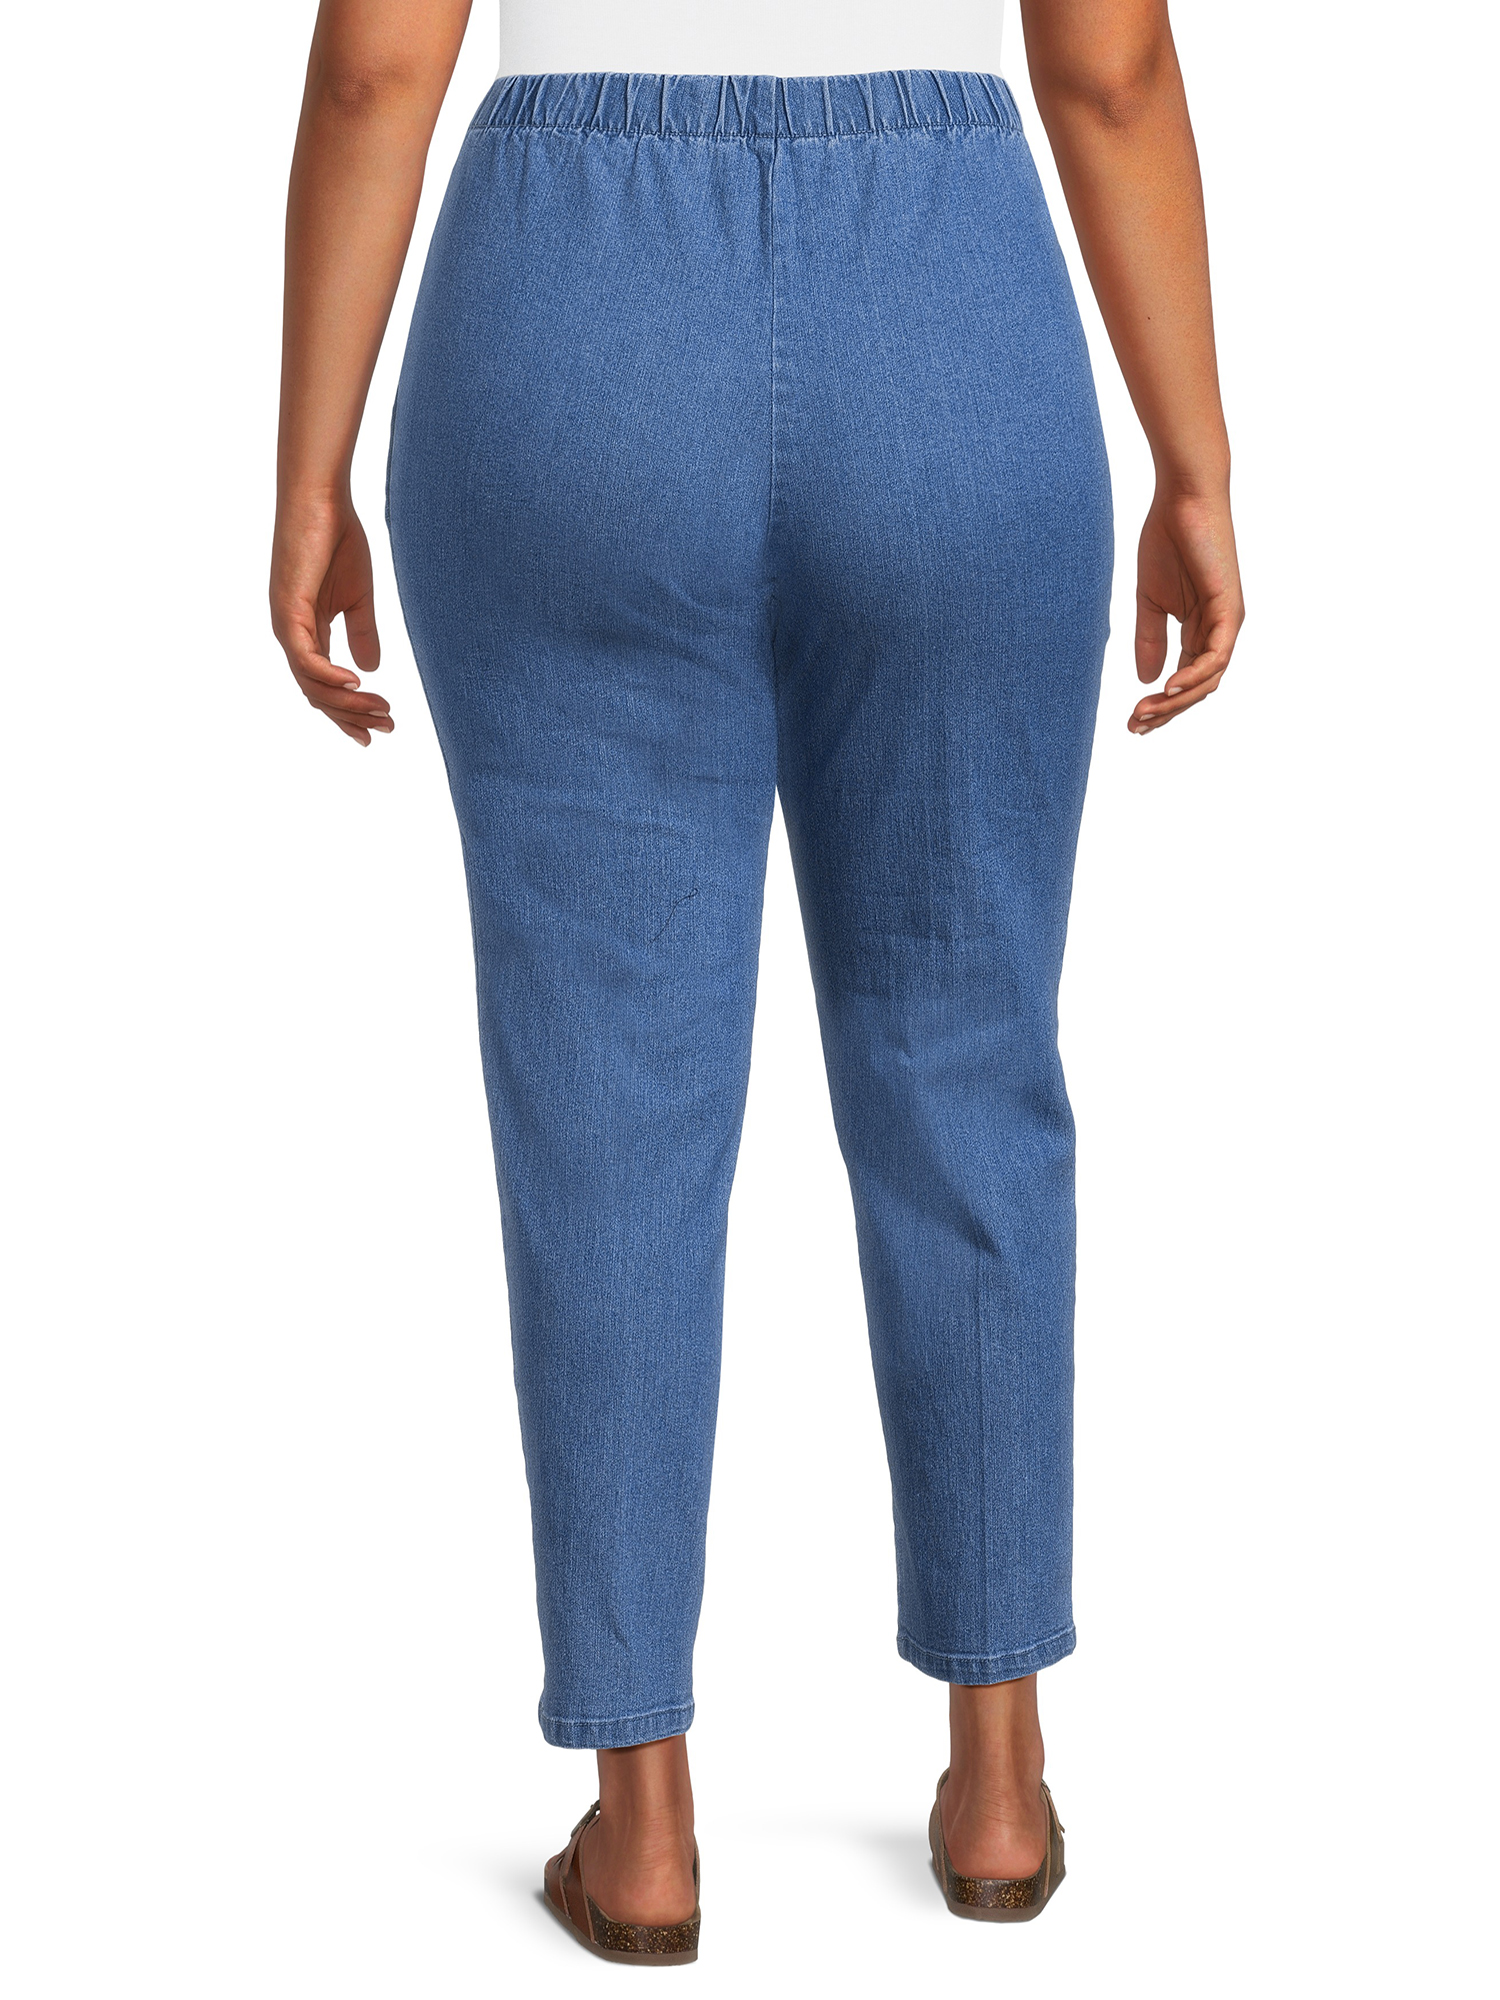 Just My Size Women's Plus Size 2 Pocket Pull On Pant, 2-Pack - image 2 of 6